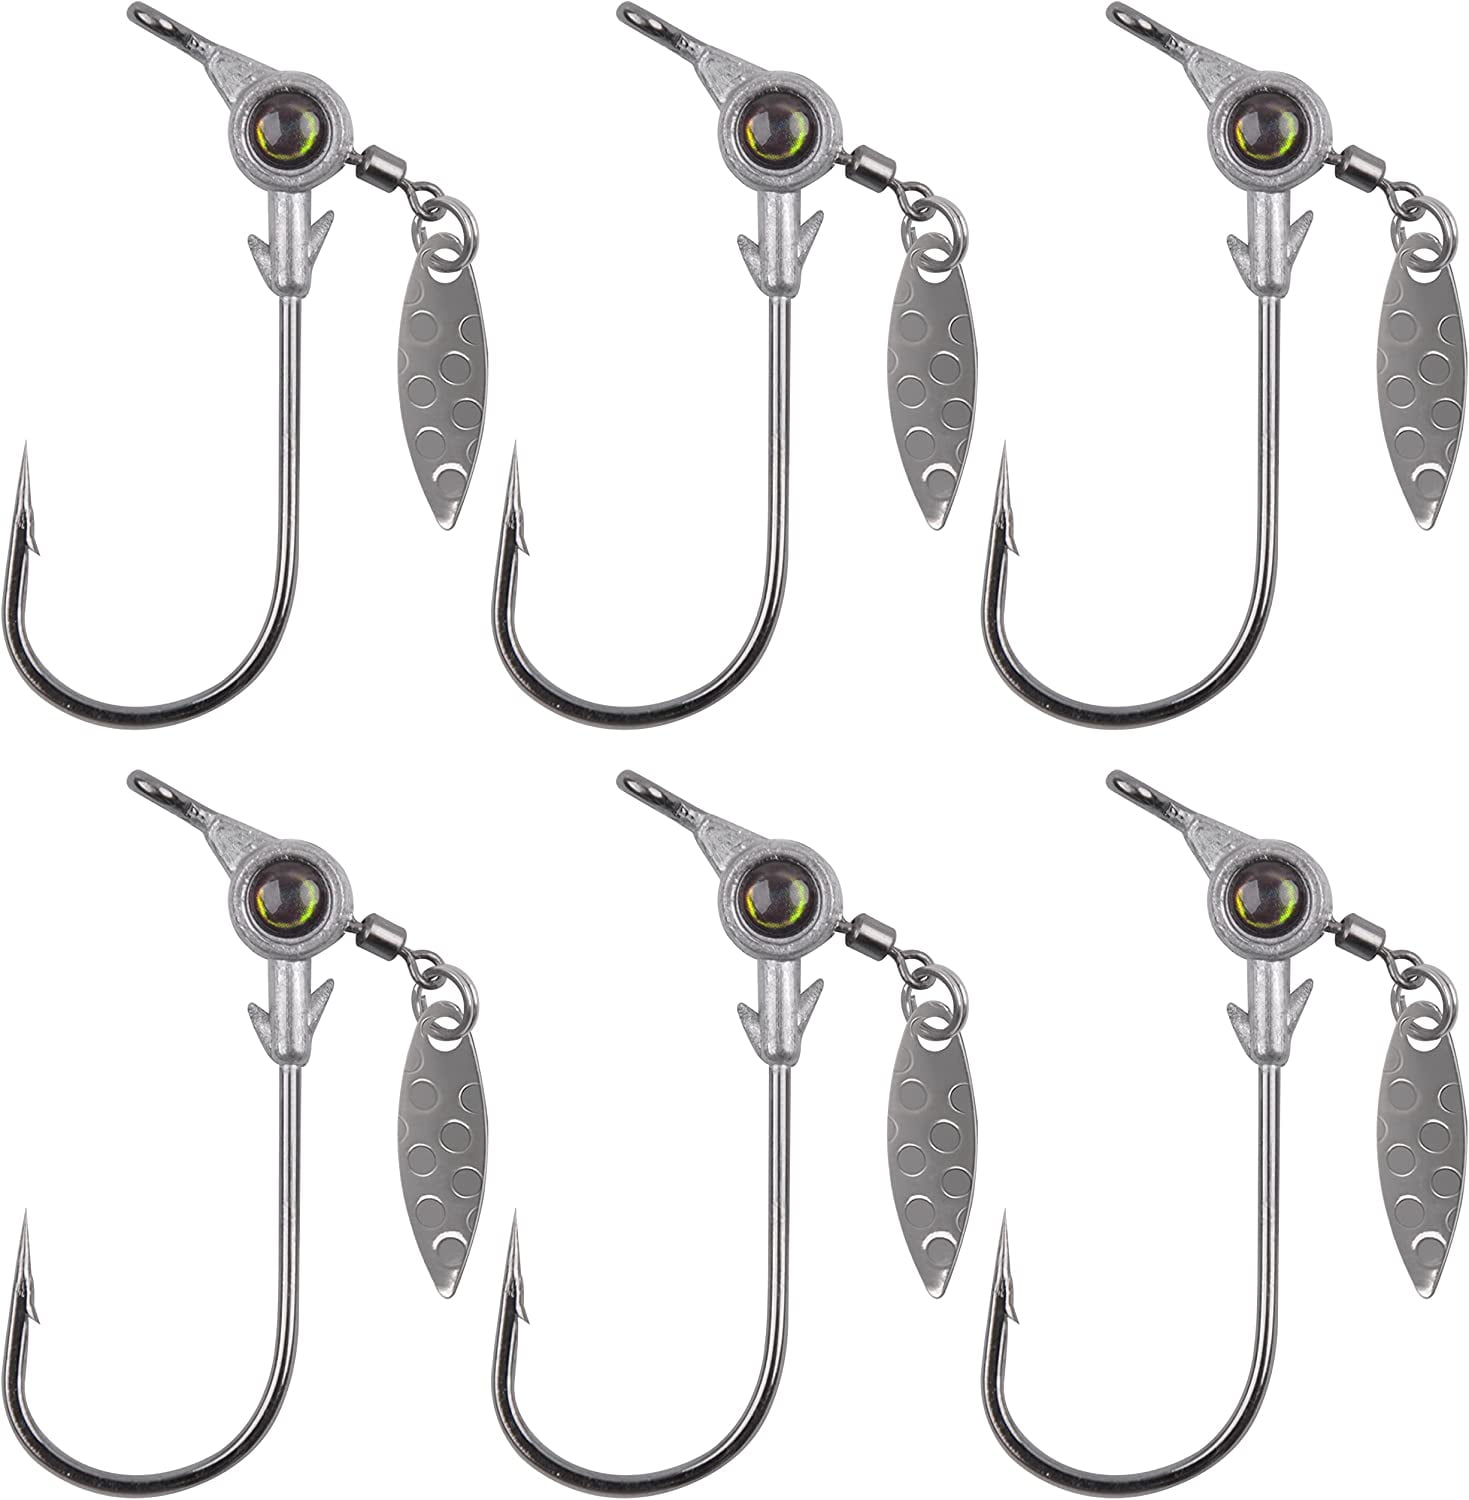 Crappie Jig Heads Fishing Kit, Underspin Jig Head Hooks with Spinner Blade  Big Eye Ball Unpainted Swimbait Lure Fishing Jig for Bass Trout 